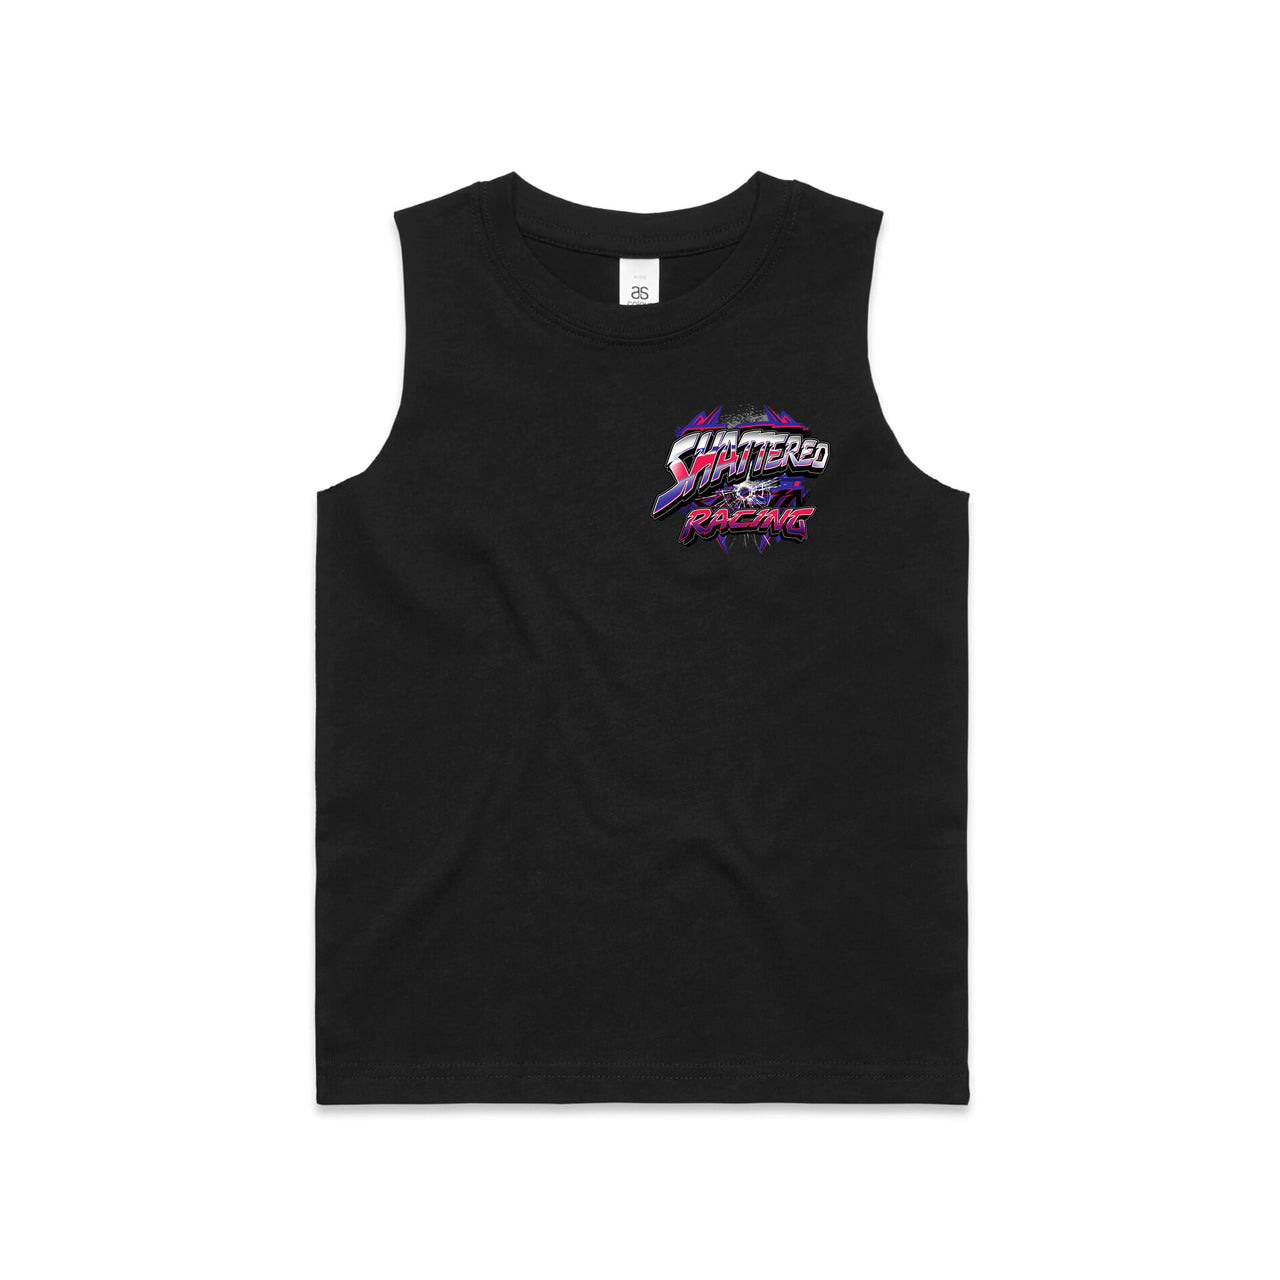 Shattered Racing Team Youth/Kids Tank